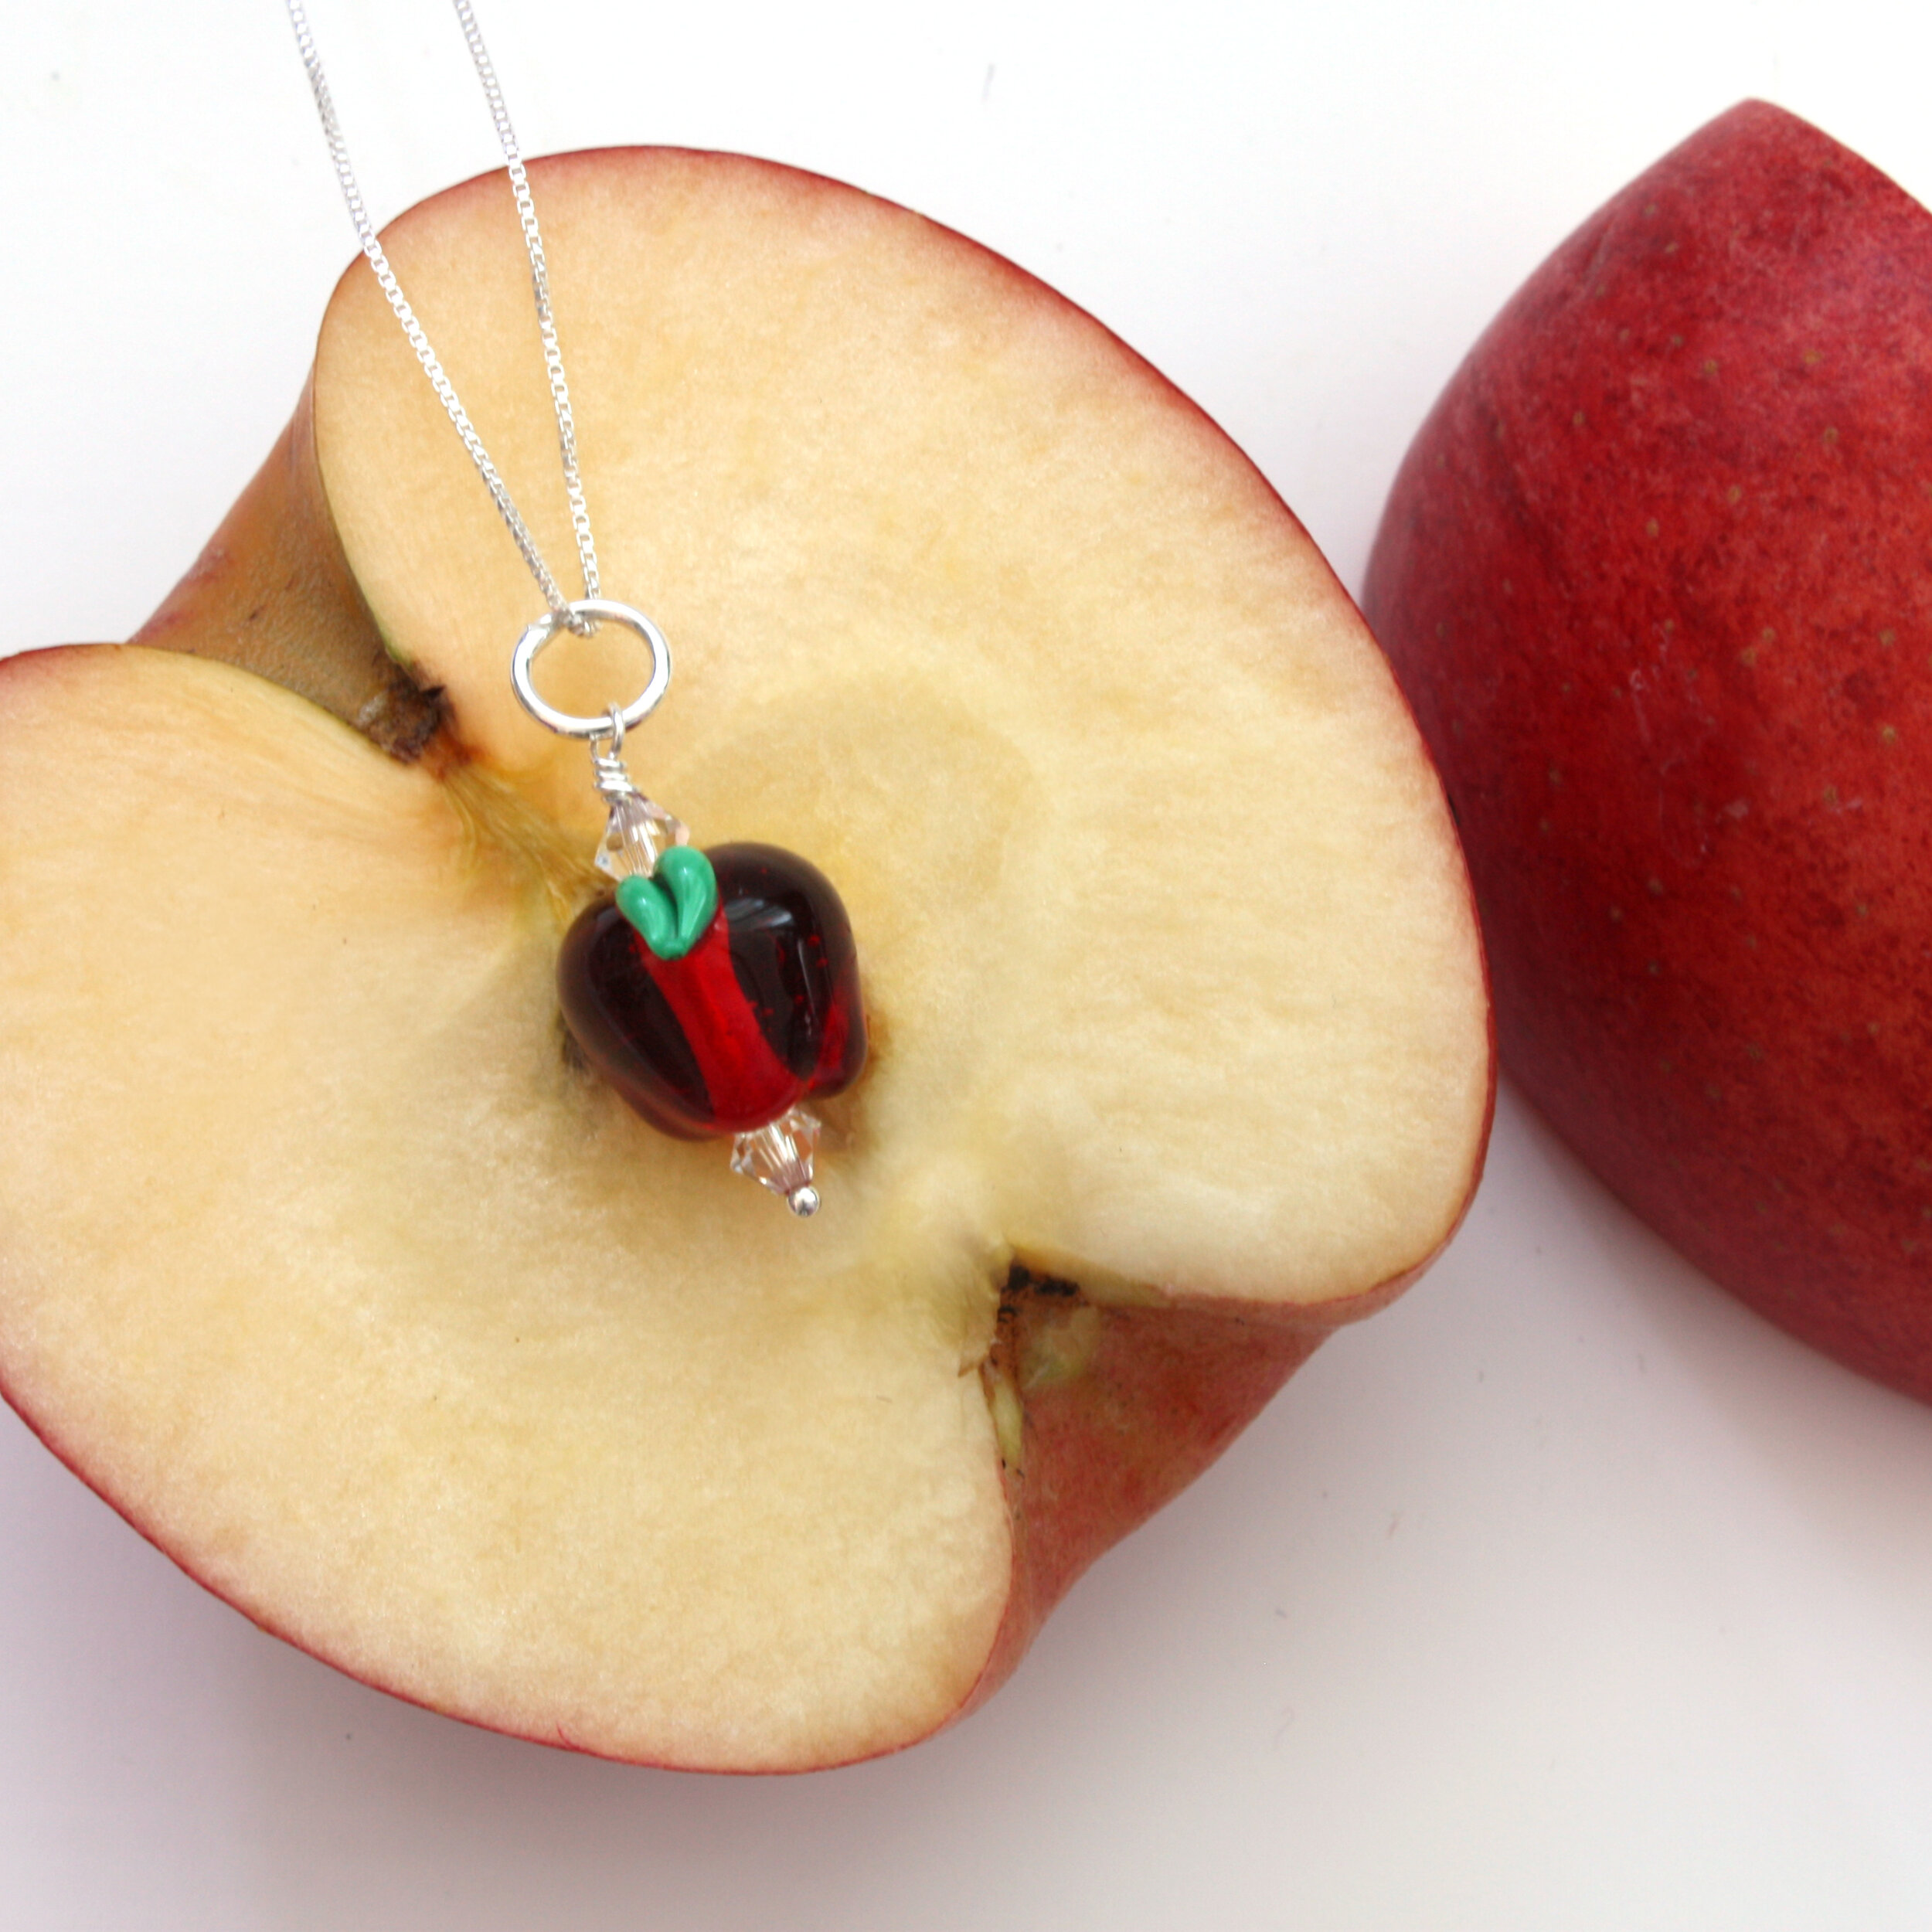 Makeup-Of-Mine: Thomas Sabo Apple Necklace Review